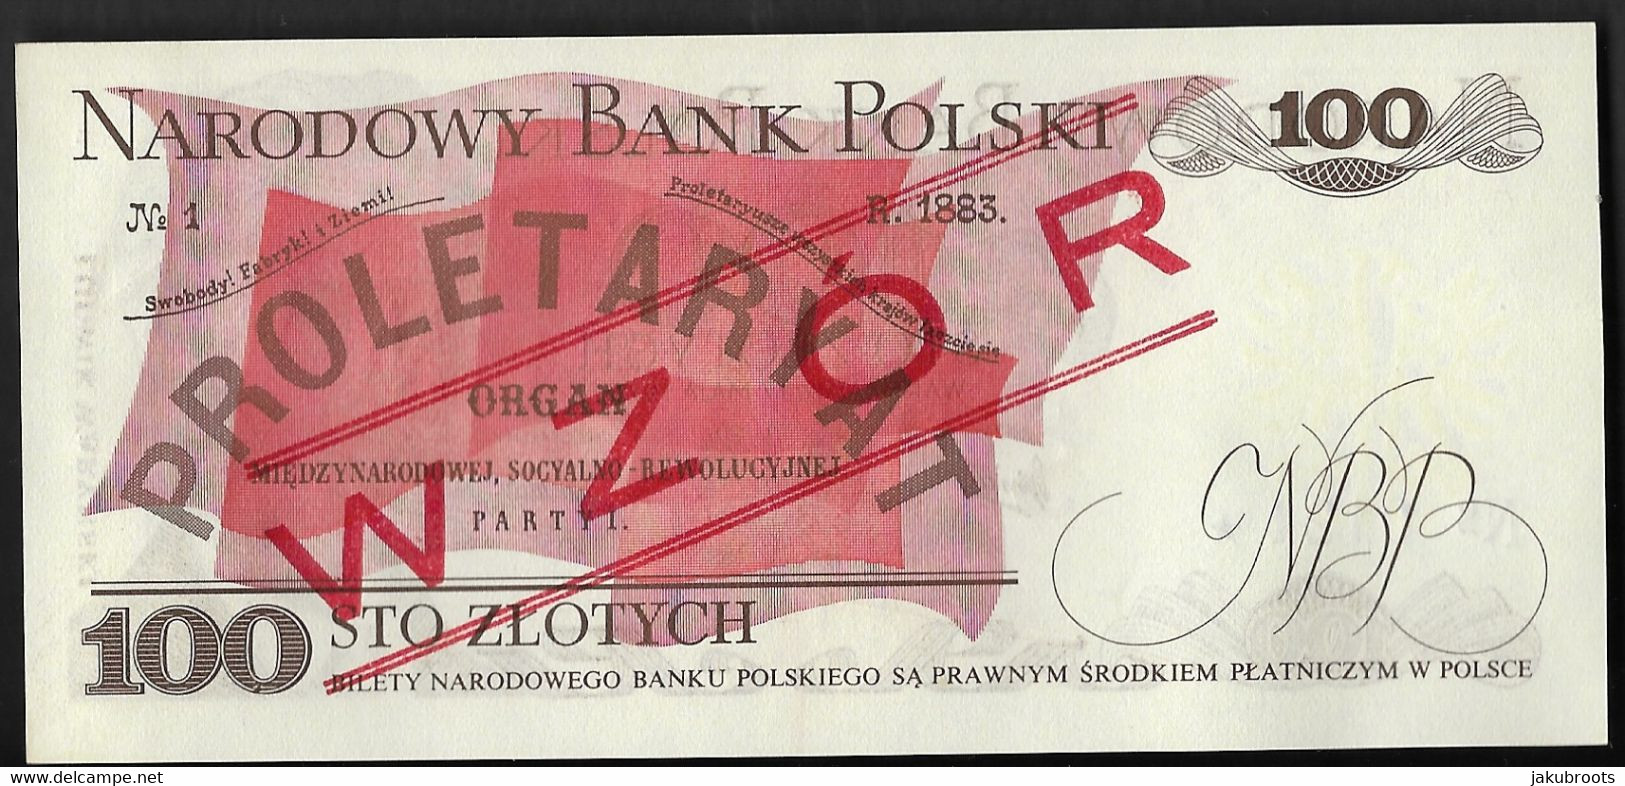 MAY 1976 POLISH NATIONAL STATE BANK 100 Zl.SPECIMEN / WZOR  Mint Condition - Poland